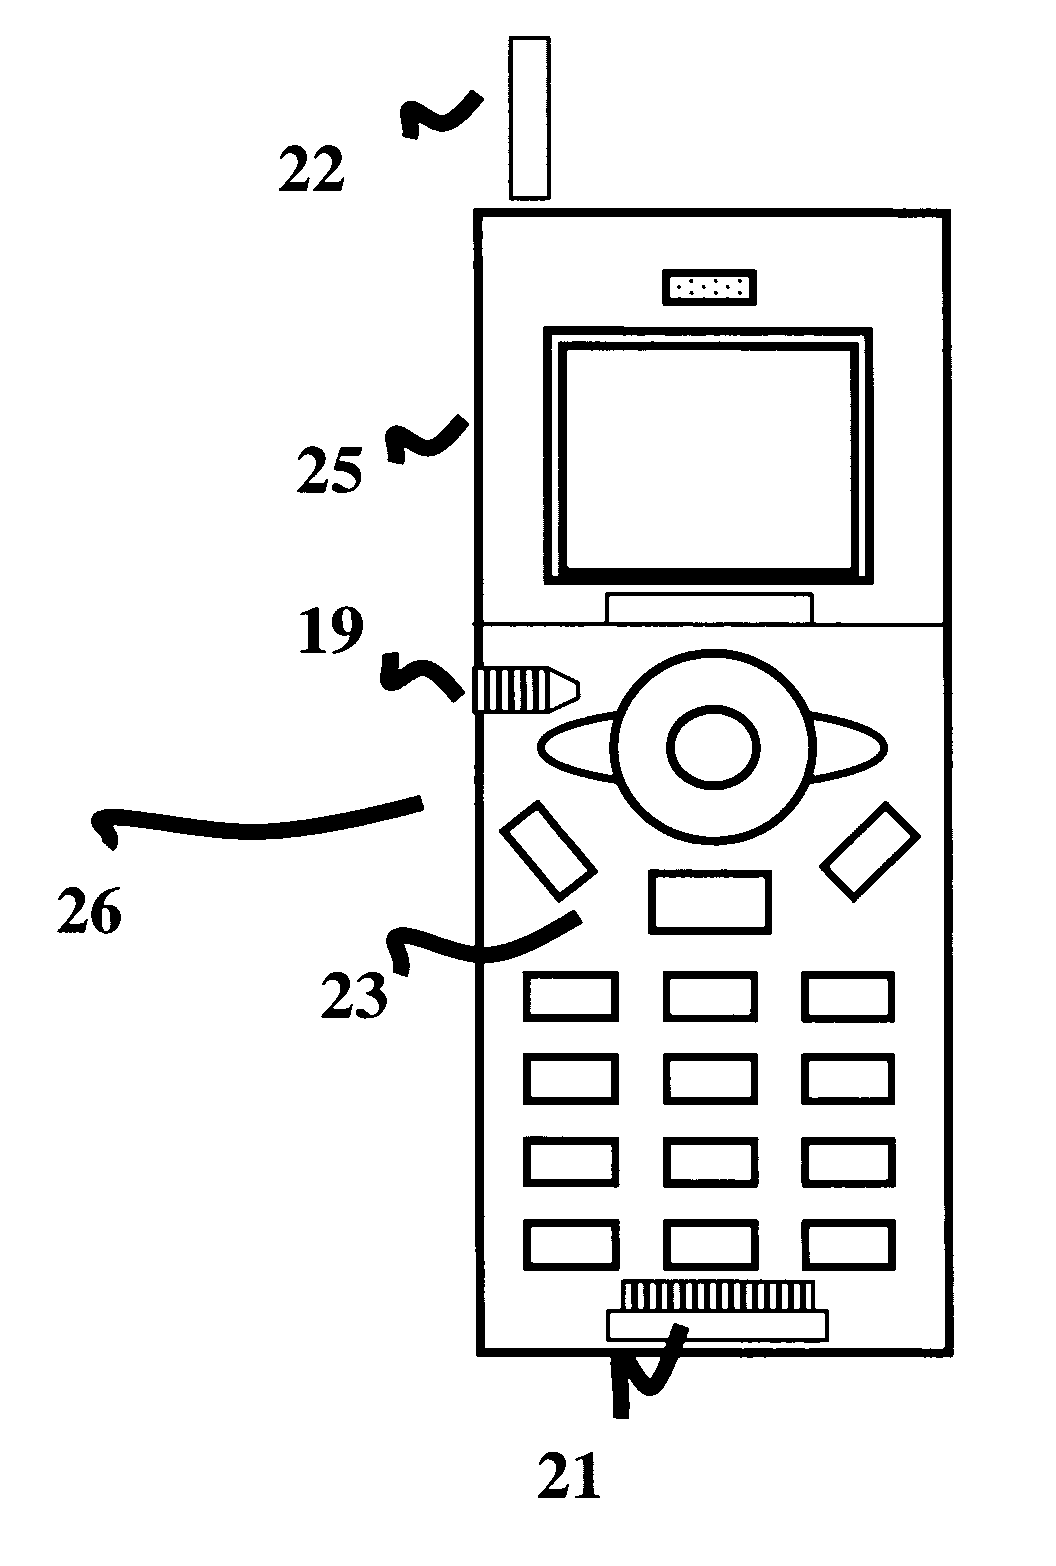 Mobile phone extension and data interface via an audio headset connection